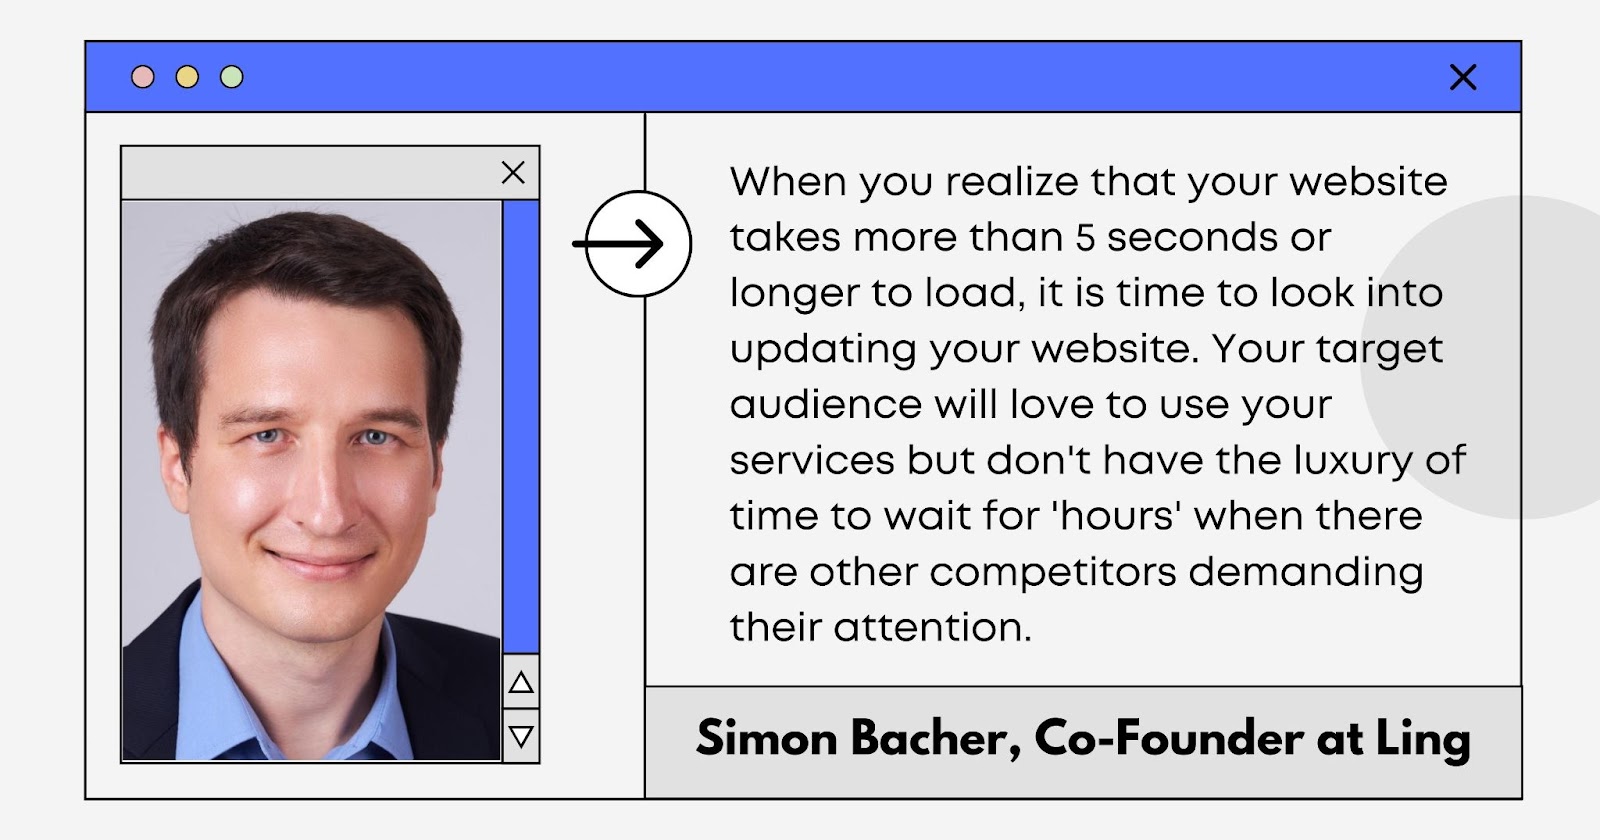 Simon Bacher, Co-Founder At Ling, Shares His Expertise On Best Practices To Follow Relating To Websites And User Experience. 